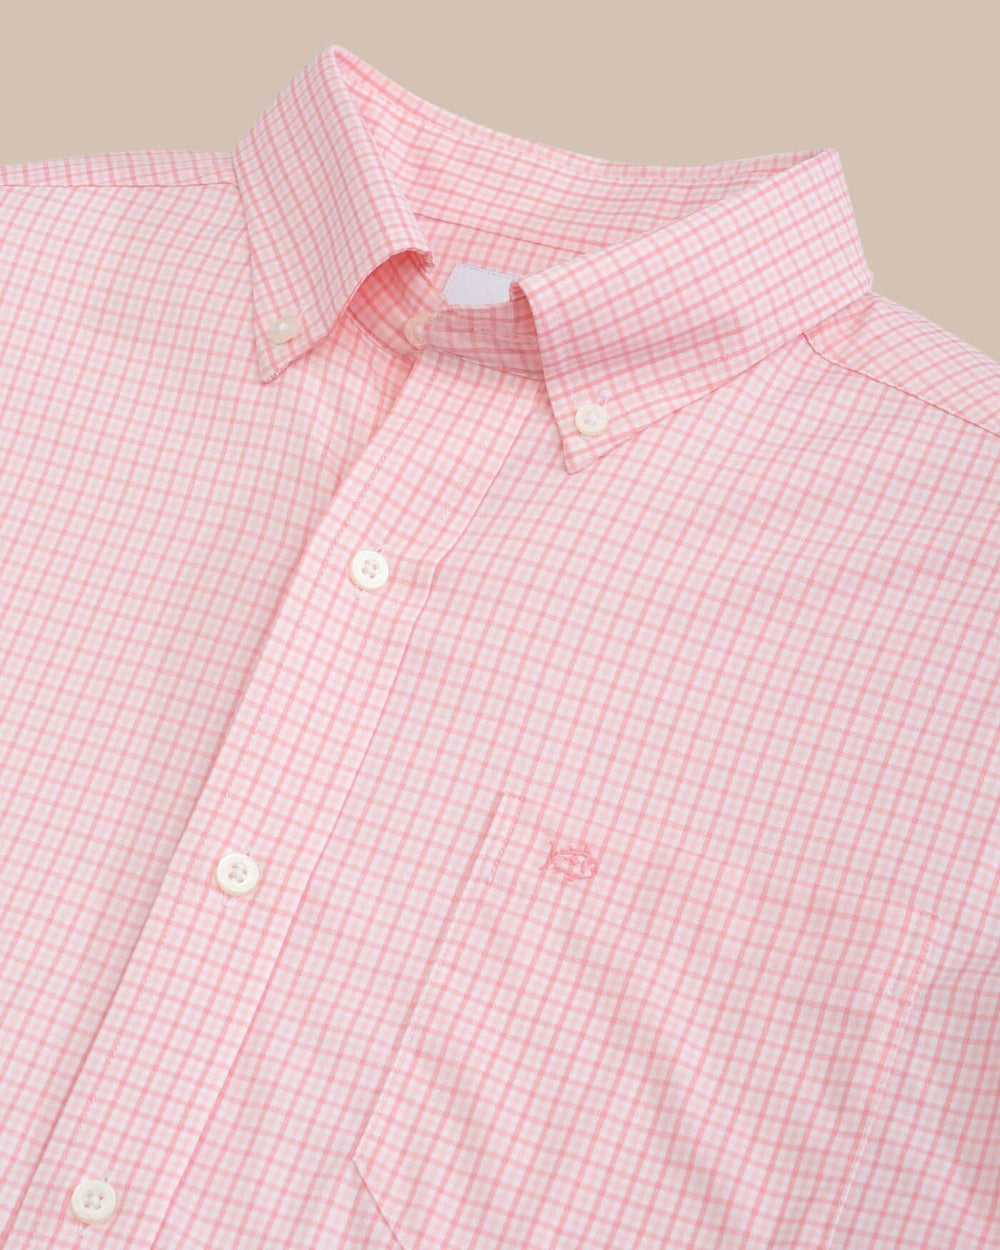 The detail view of the Southern Tide brrr Intercoastal McBee Check Long Sleeve Sportshirt by Southern Tide - Geranium Pink